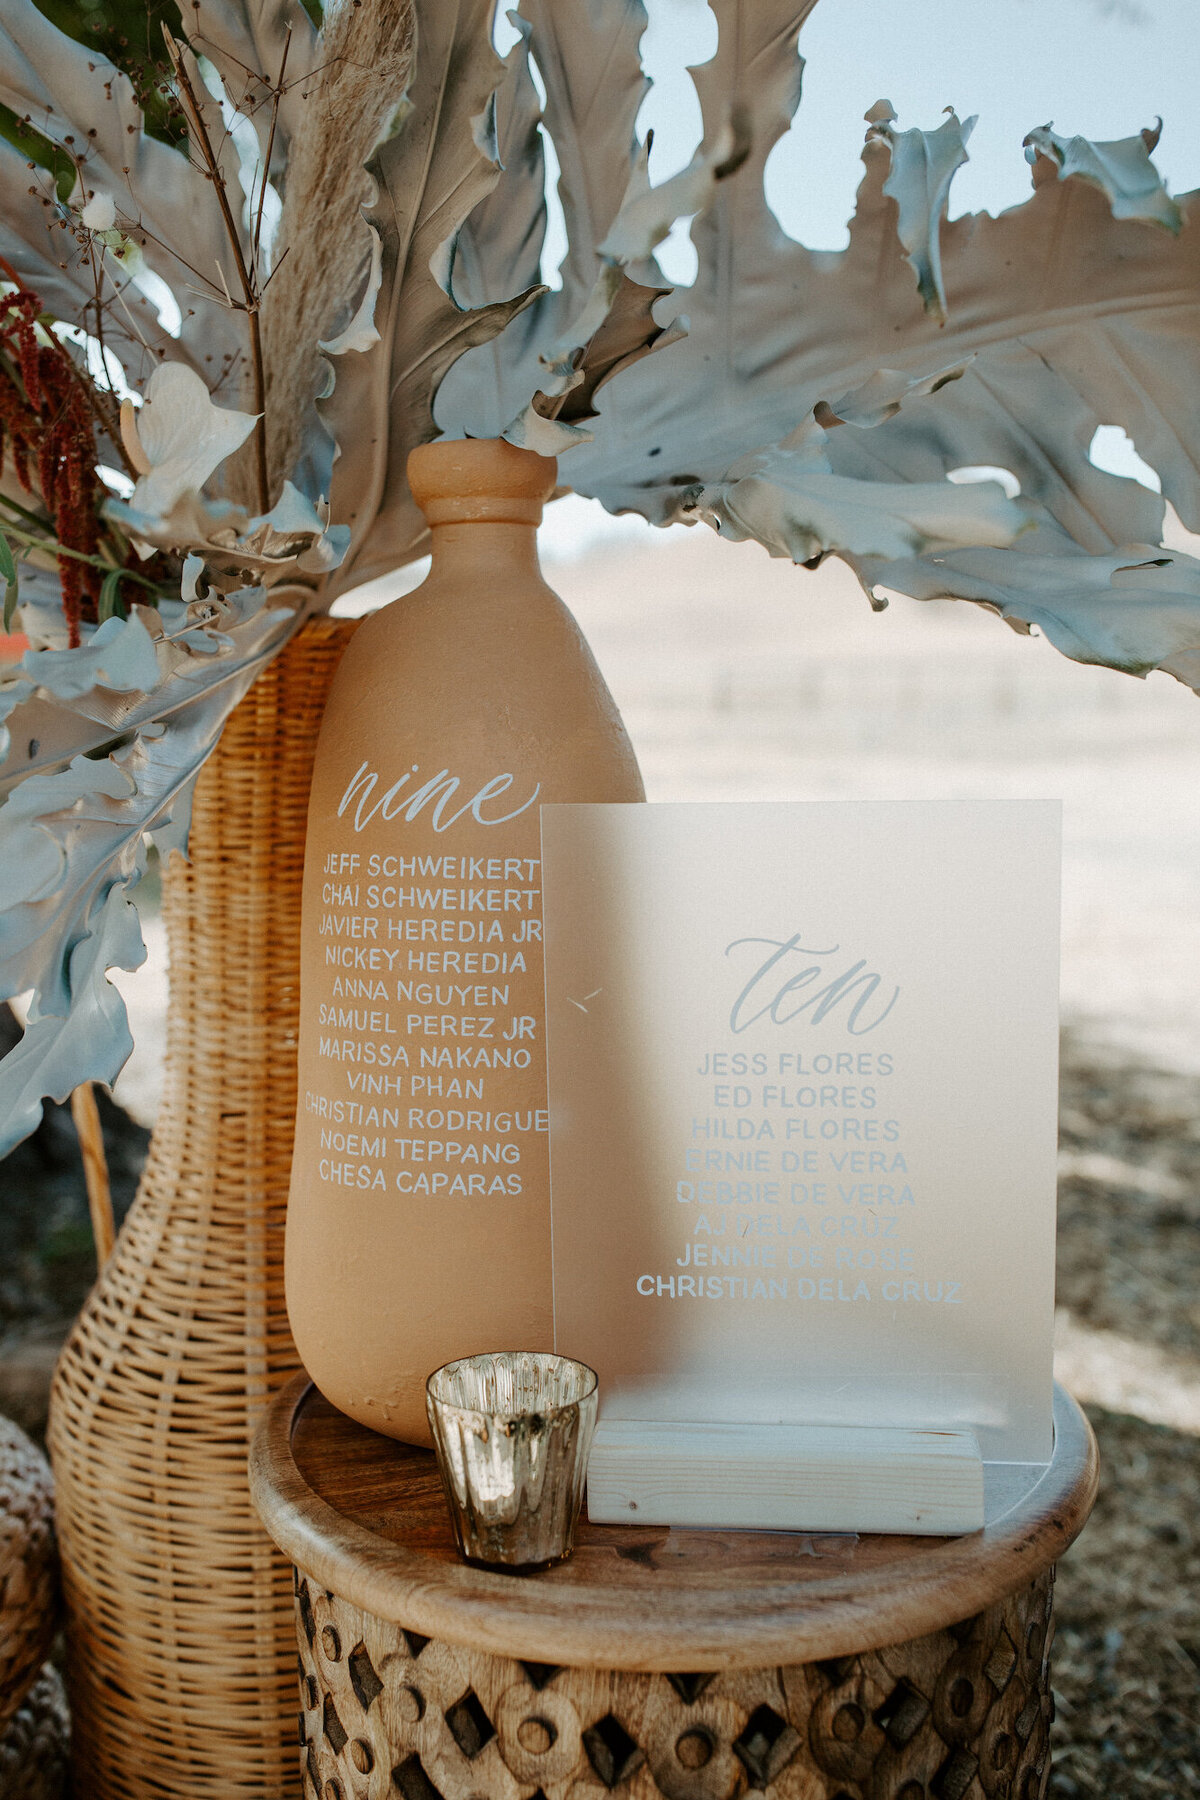 Terra cotta jug and acrylic seating chart decorated with dried florals